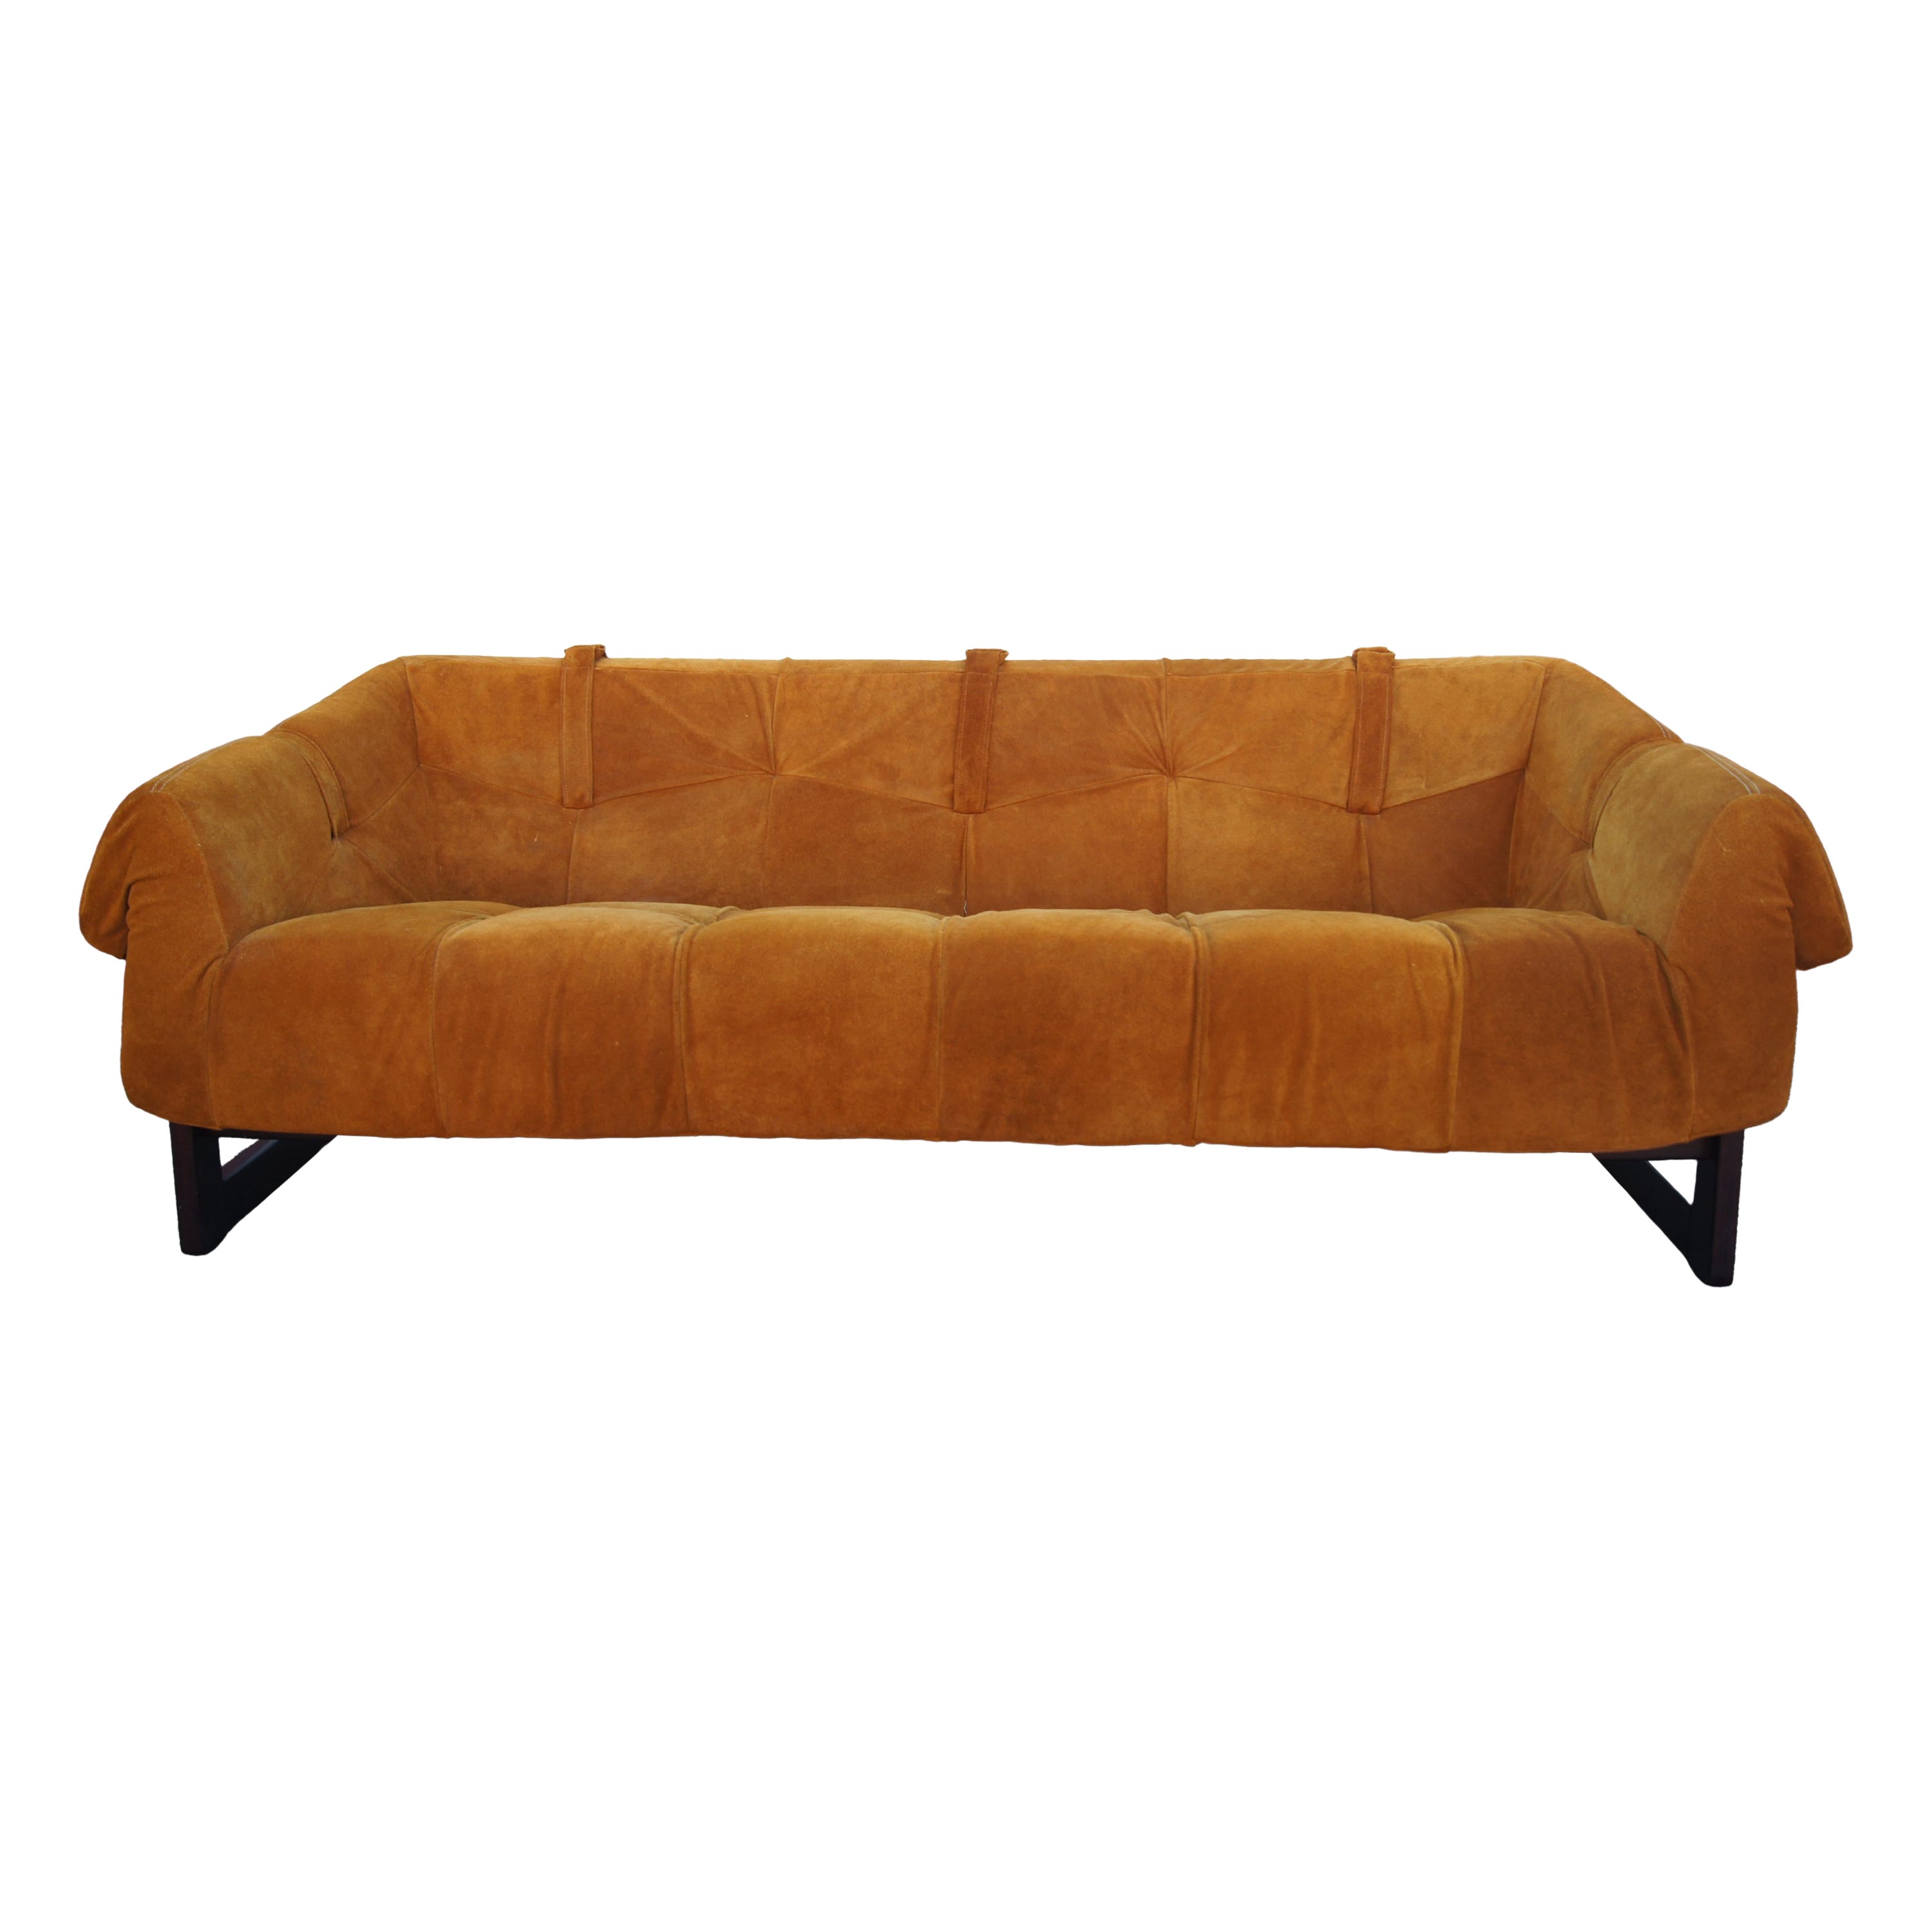 Rosewood and Suede MP-091 Sofa by Percival Lafer for Lafer MP For Sale